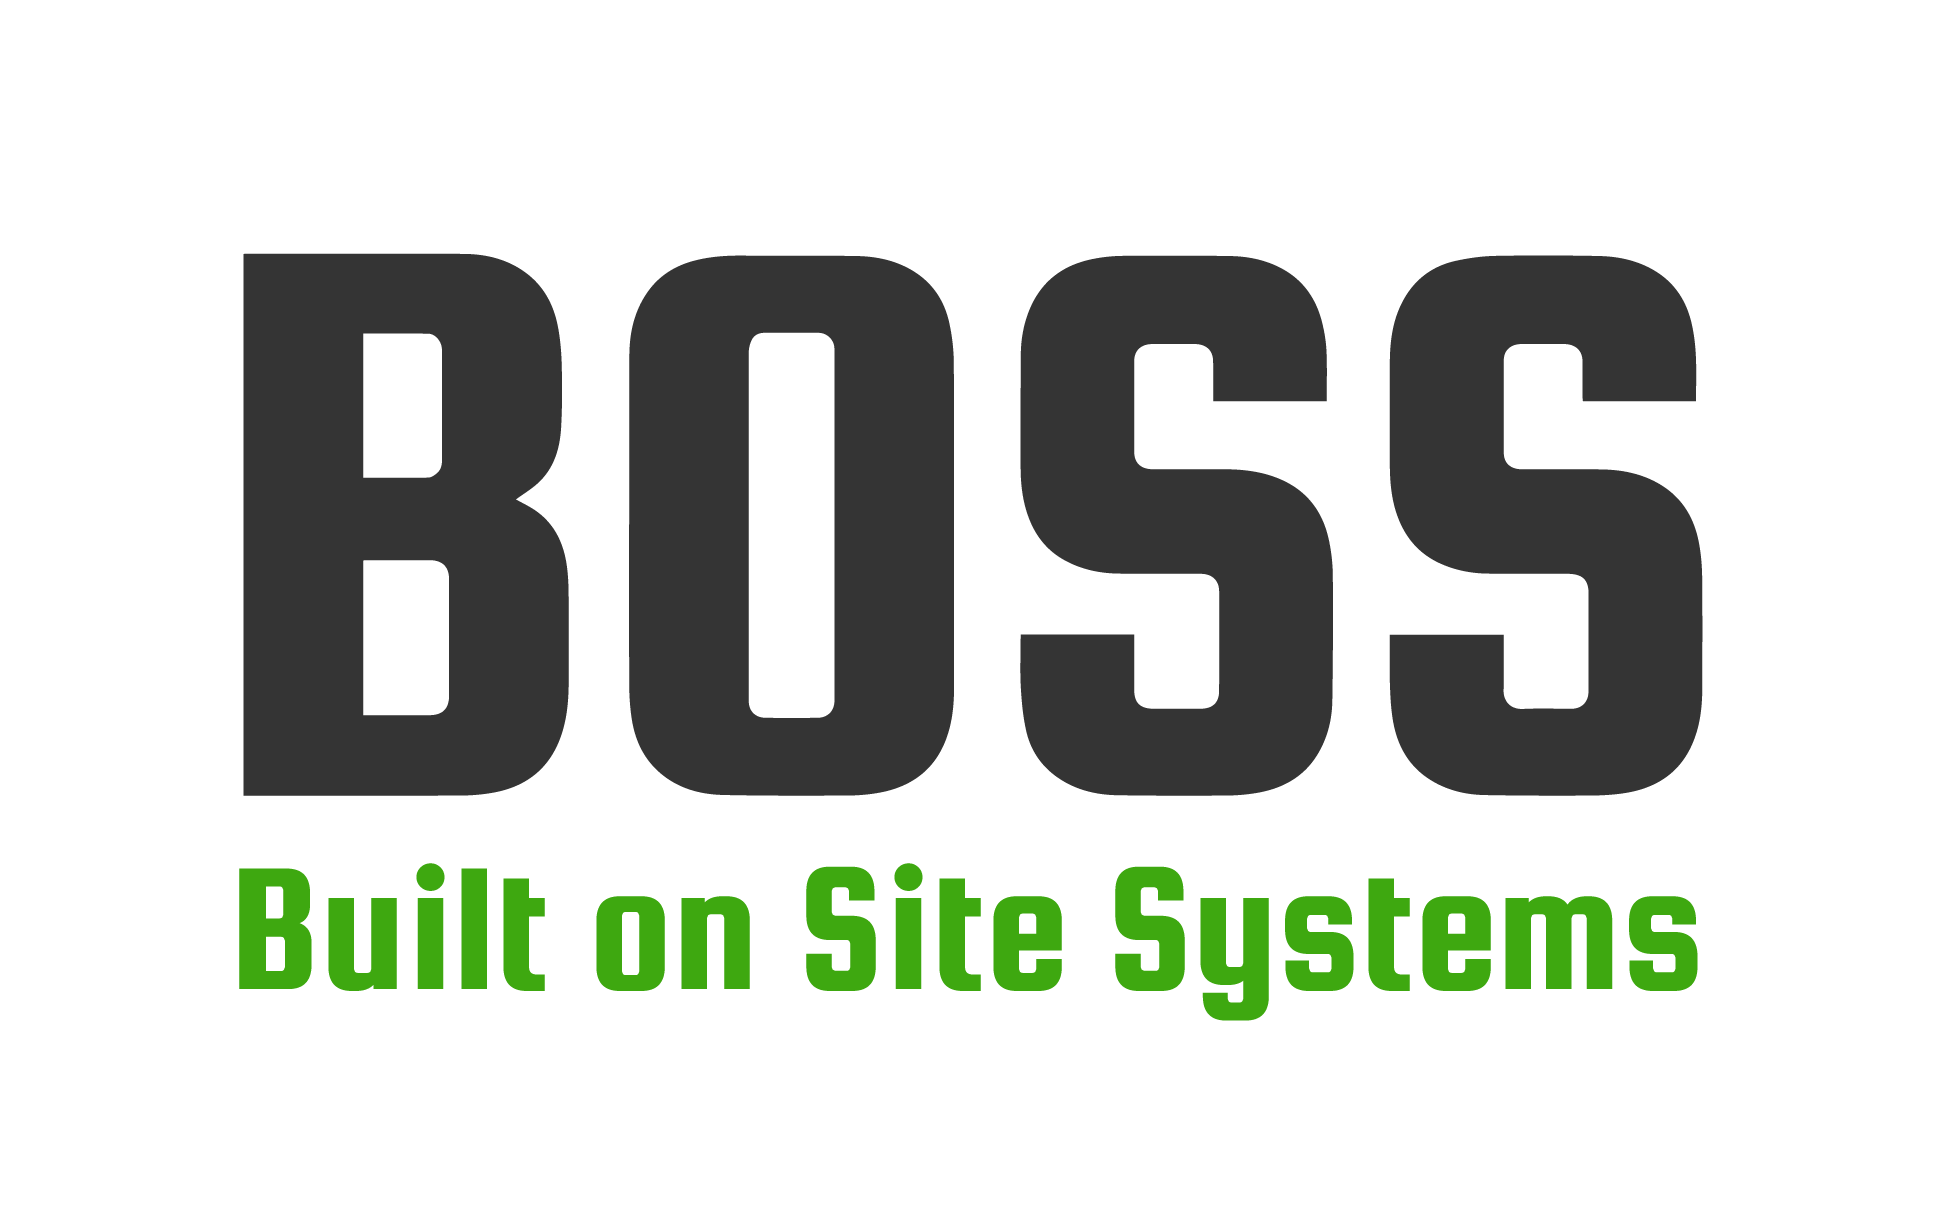 Built-On-Site Systems